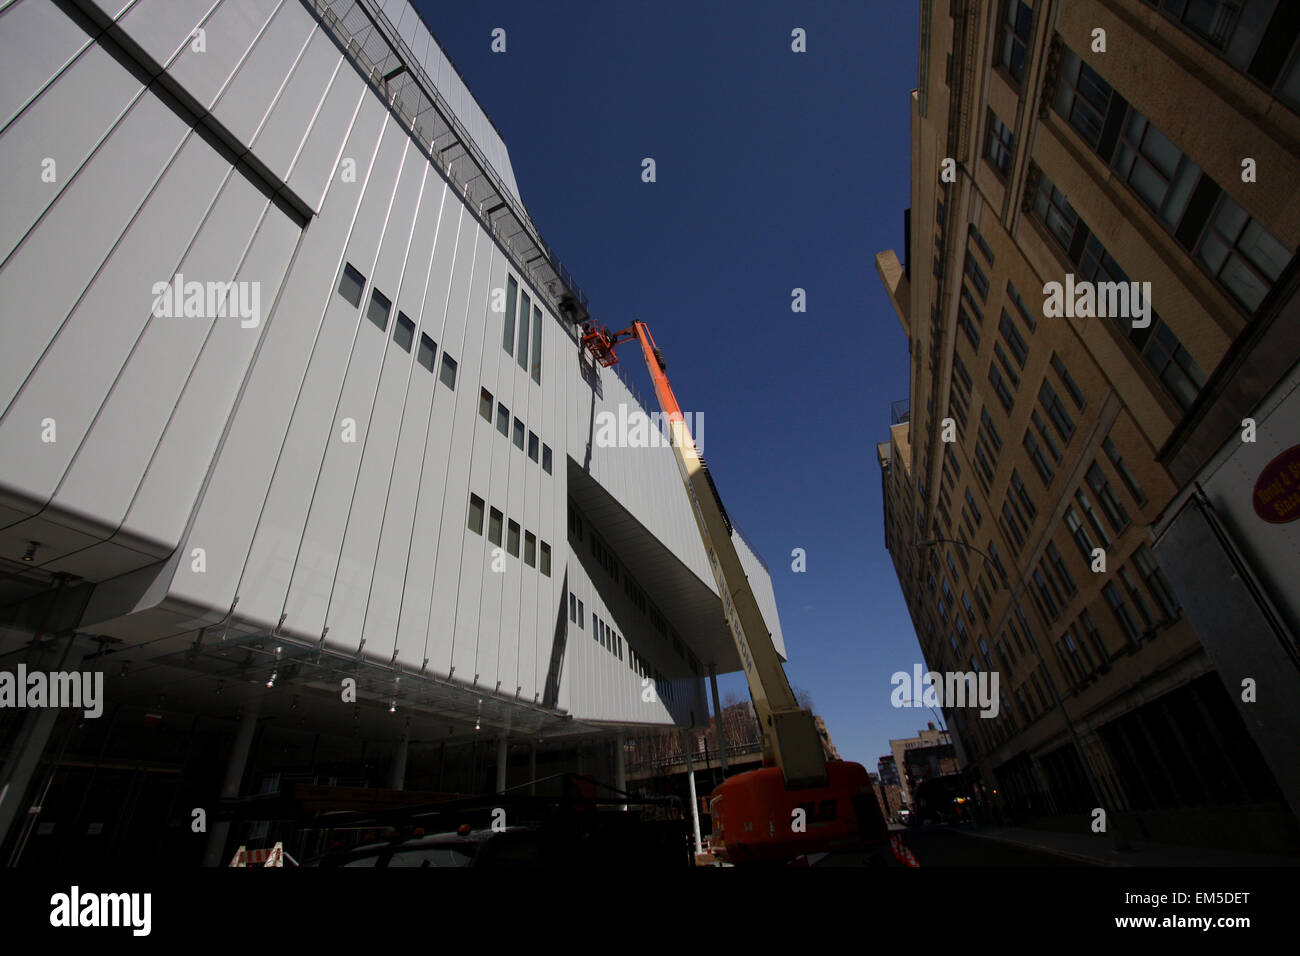 New York, USA. 15th Apr, 2015. Construction workers putting finishing touches on the new Whitney Museum of American Art building at Washington Street and Gansevoort Street, in New York City's Meatpacking District at the end of the High Line.   Designed by architect Renzo Piano, the 200,000-square-foot space will open to the public on May 1st, 2015        London 2012  - Olympics:   Swimming Practice        London 2012  - Olympics:  Diving Practice.        London 2012  - Olympics:  Swimming Practice. Credit:  Adam Stoltman/Alamy Live News Stock Photo